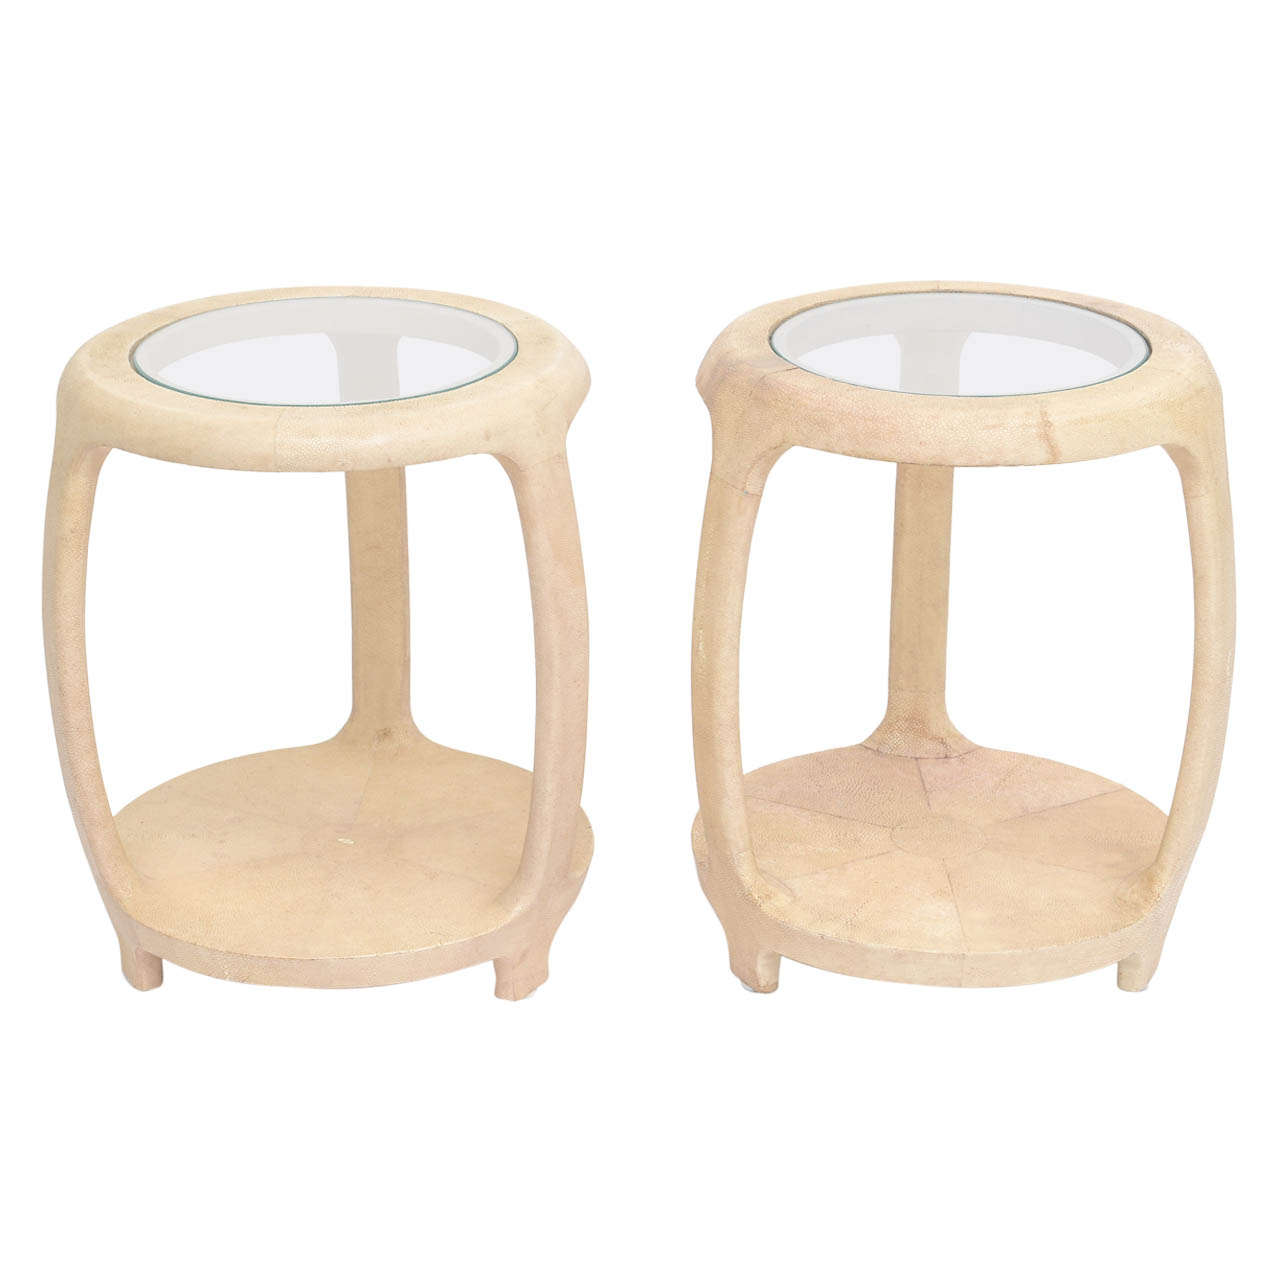 Pair of American Modern Shagreen and Glass Side Tables by Maitland-Smith